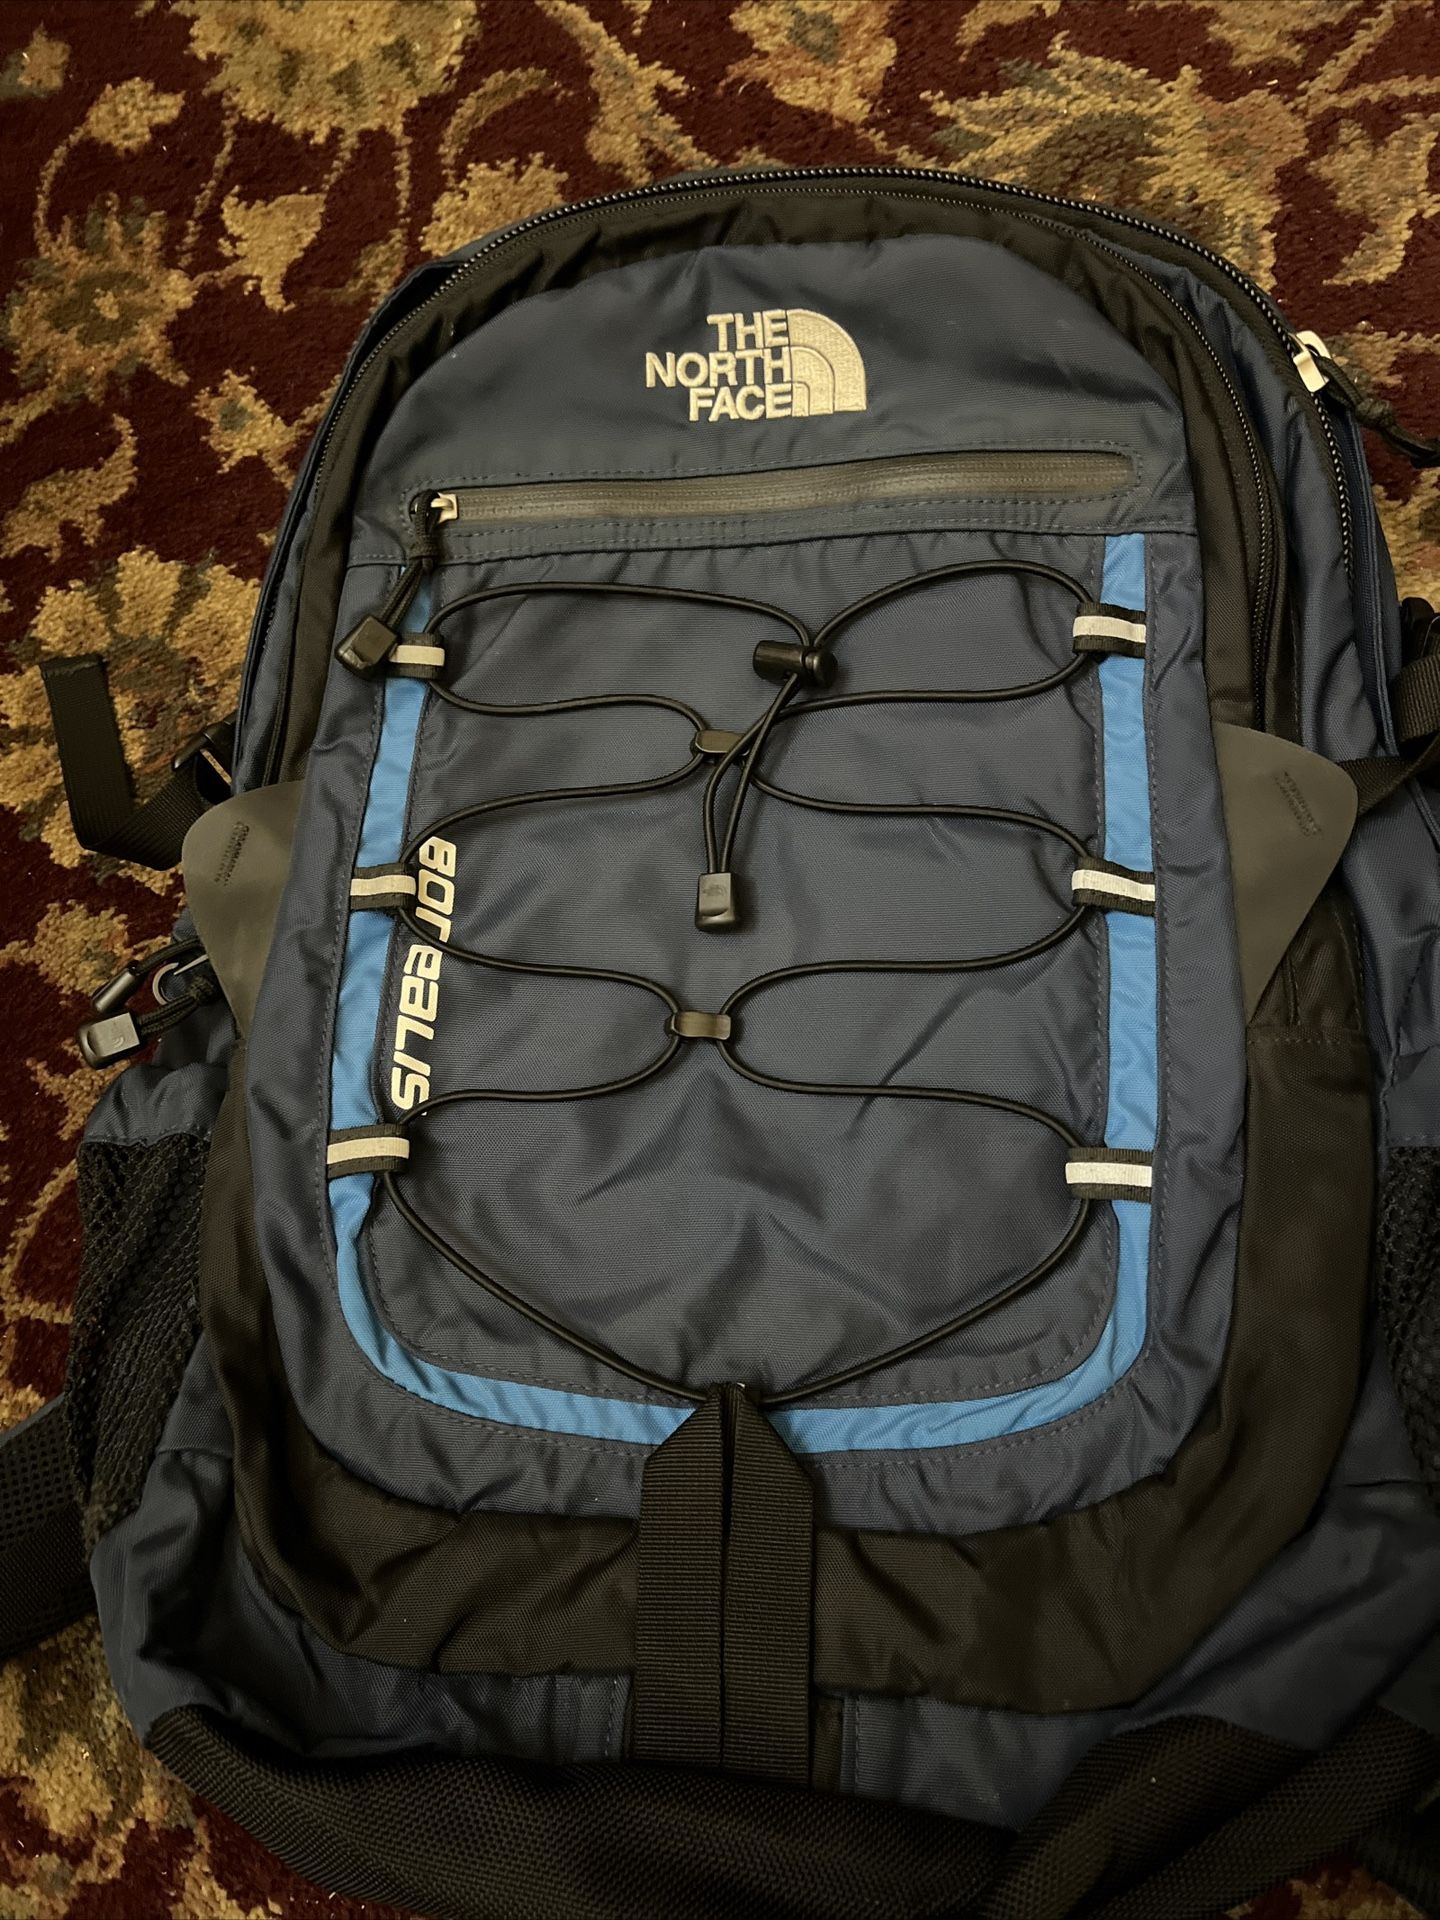 The North Face Navy Backpack 